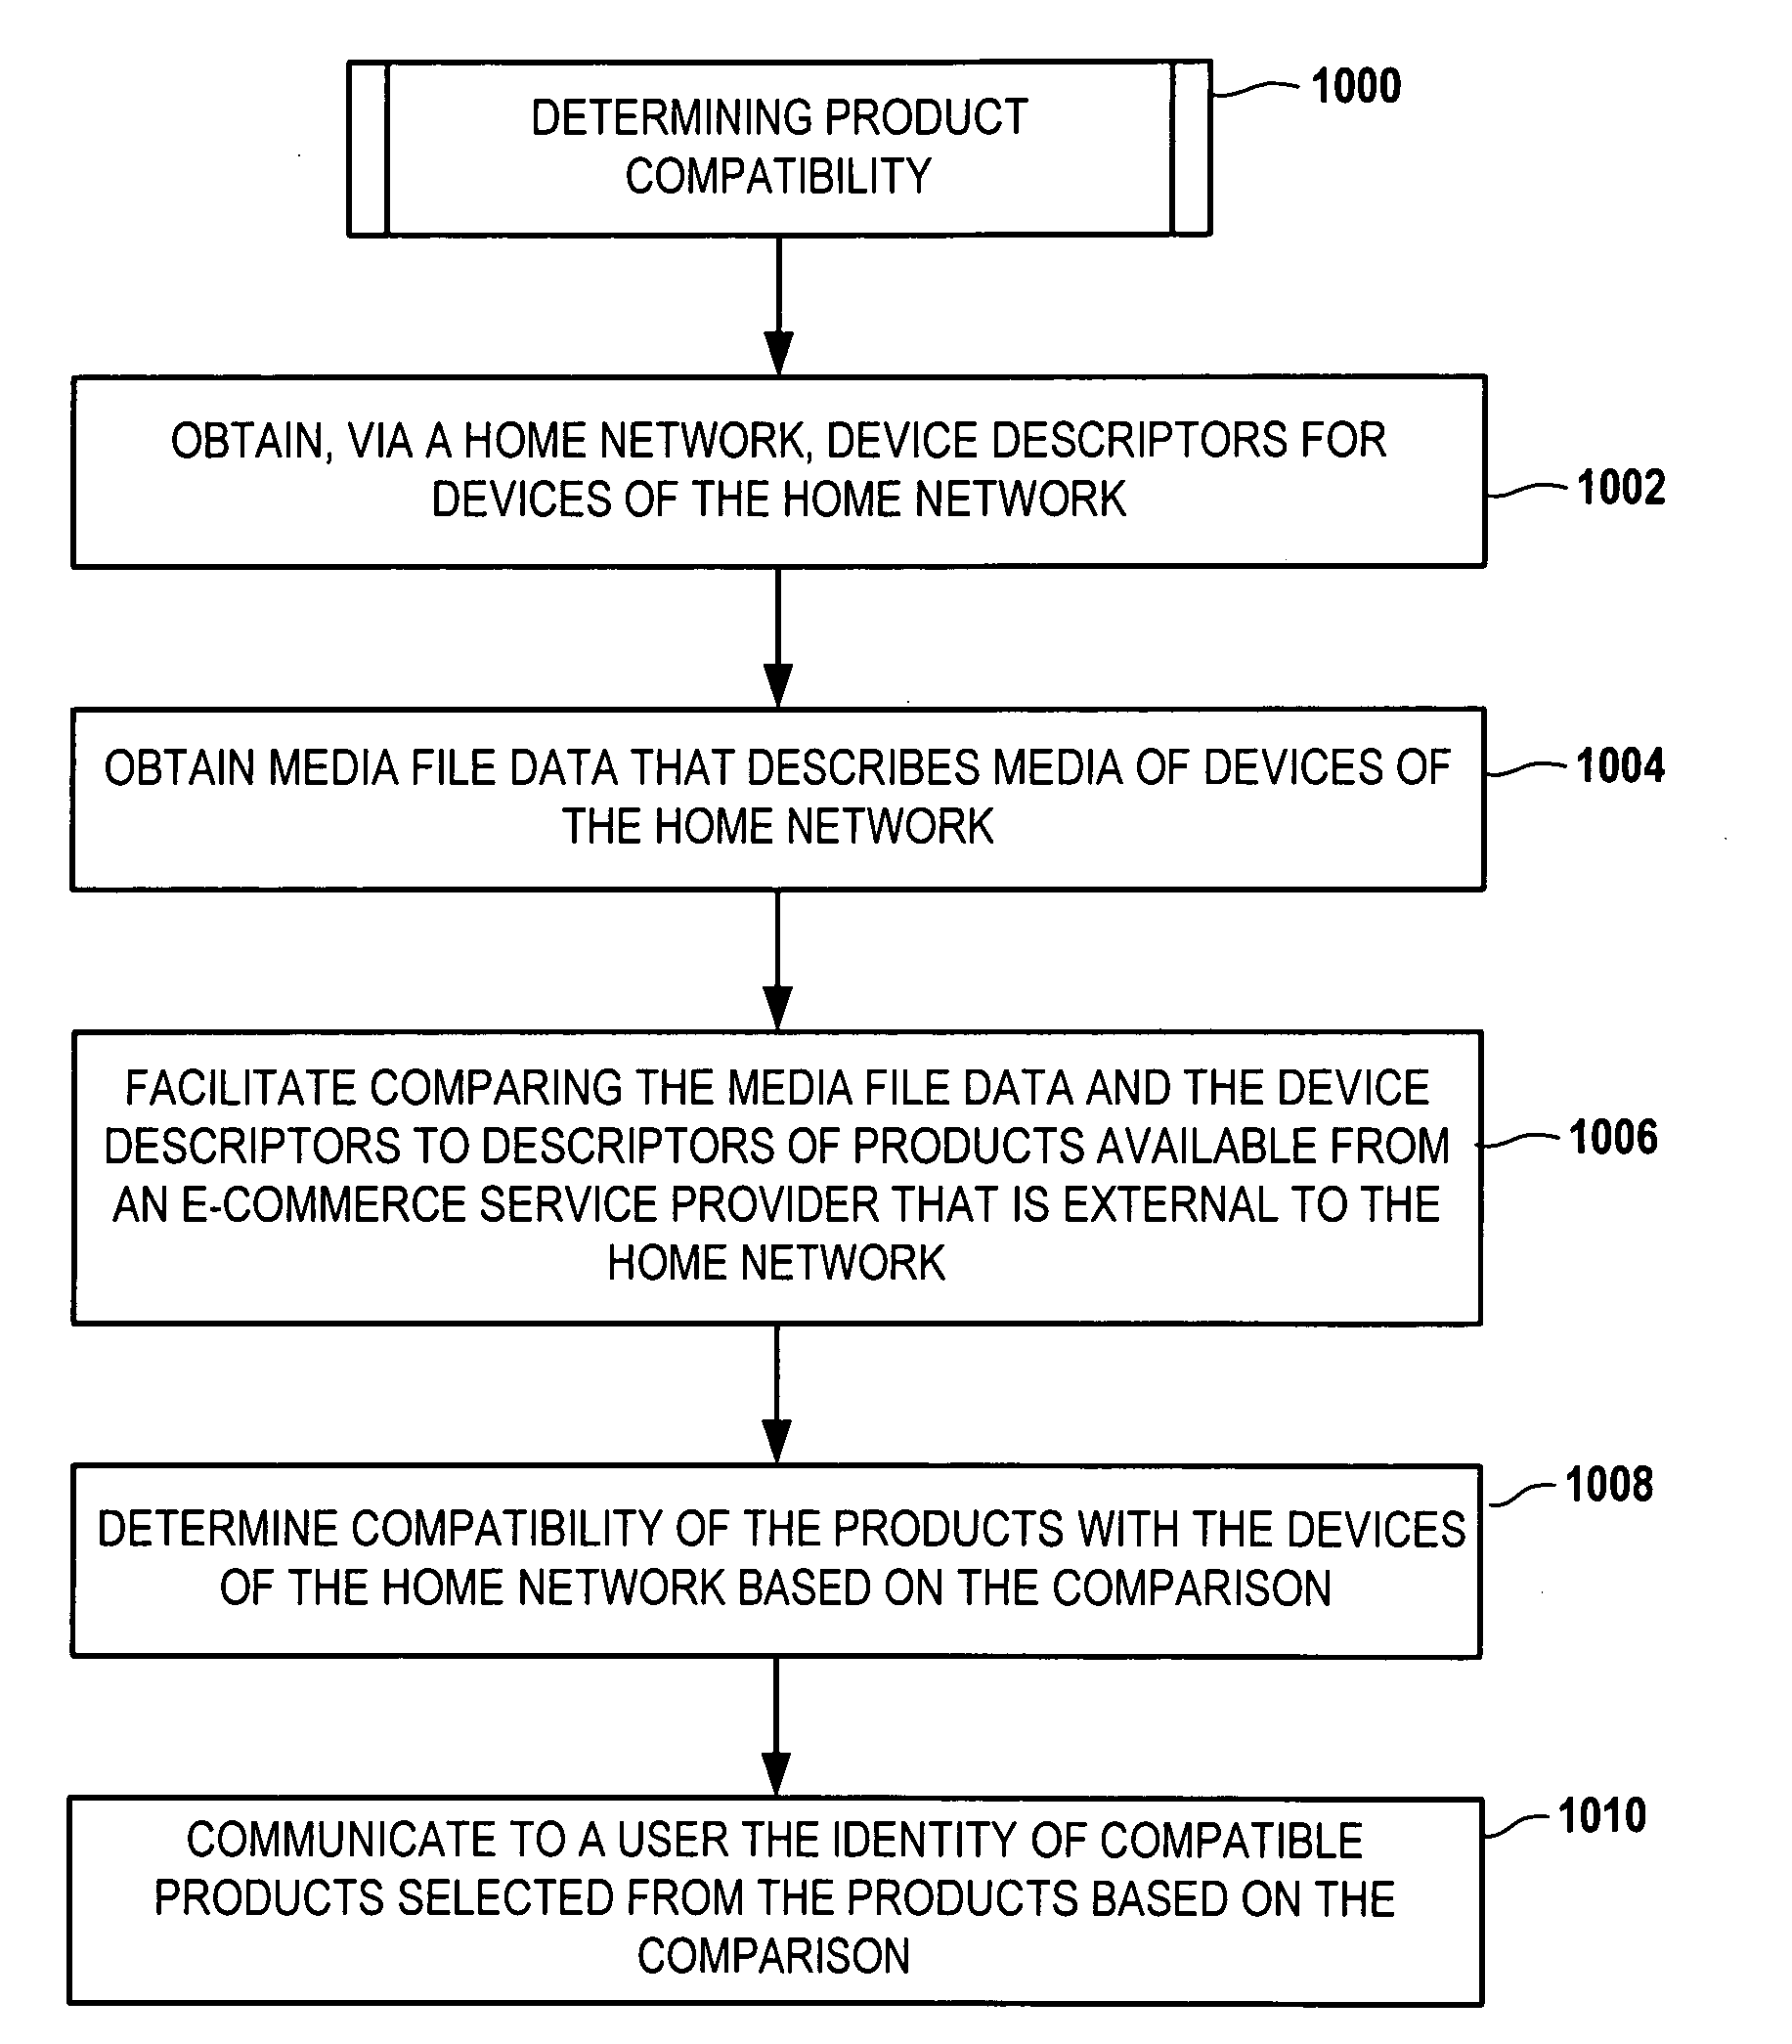 Use of network composition descriptors for determining product compatibility